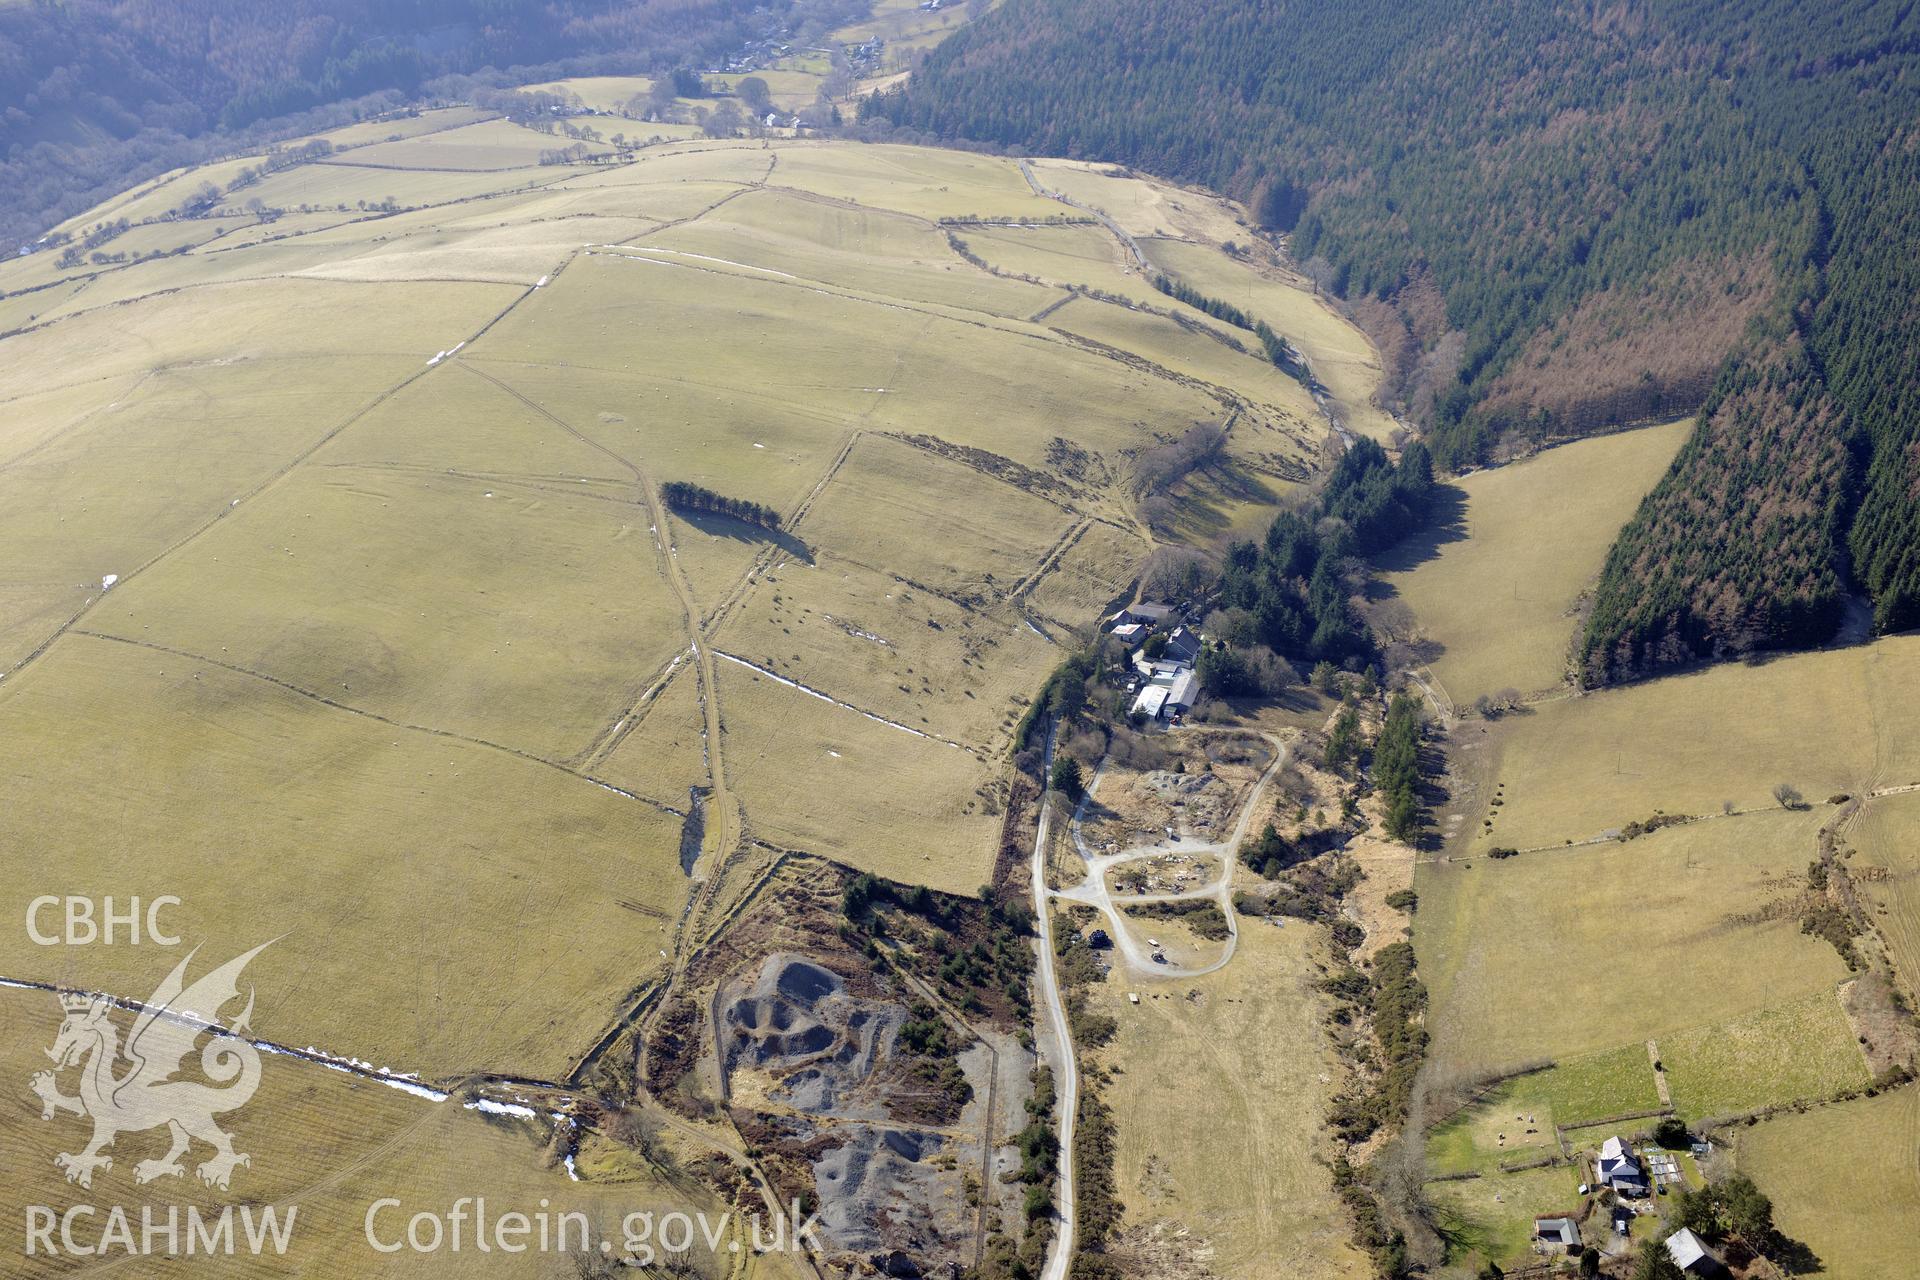 East Darren lead mine, part of the larger Cwmsymlog lead mine, Cwmsymlog, north of Goginan, Aberystwyth. Oblique aerial photograph taken during the Royal Commission's programme of archaeological aerial reconnaissance by Toby Driver on 2nd April 2013.